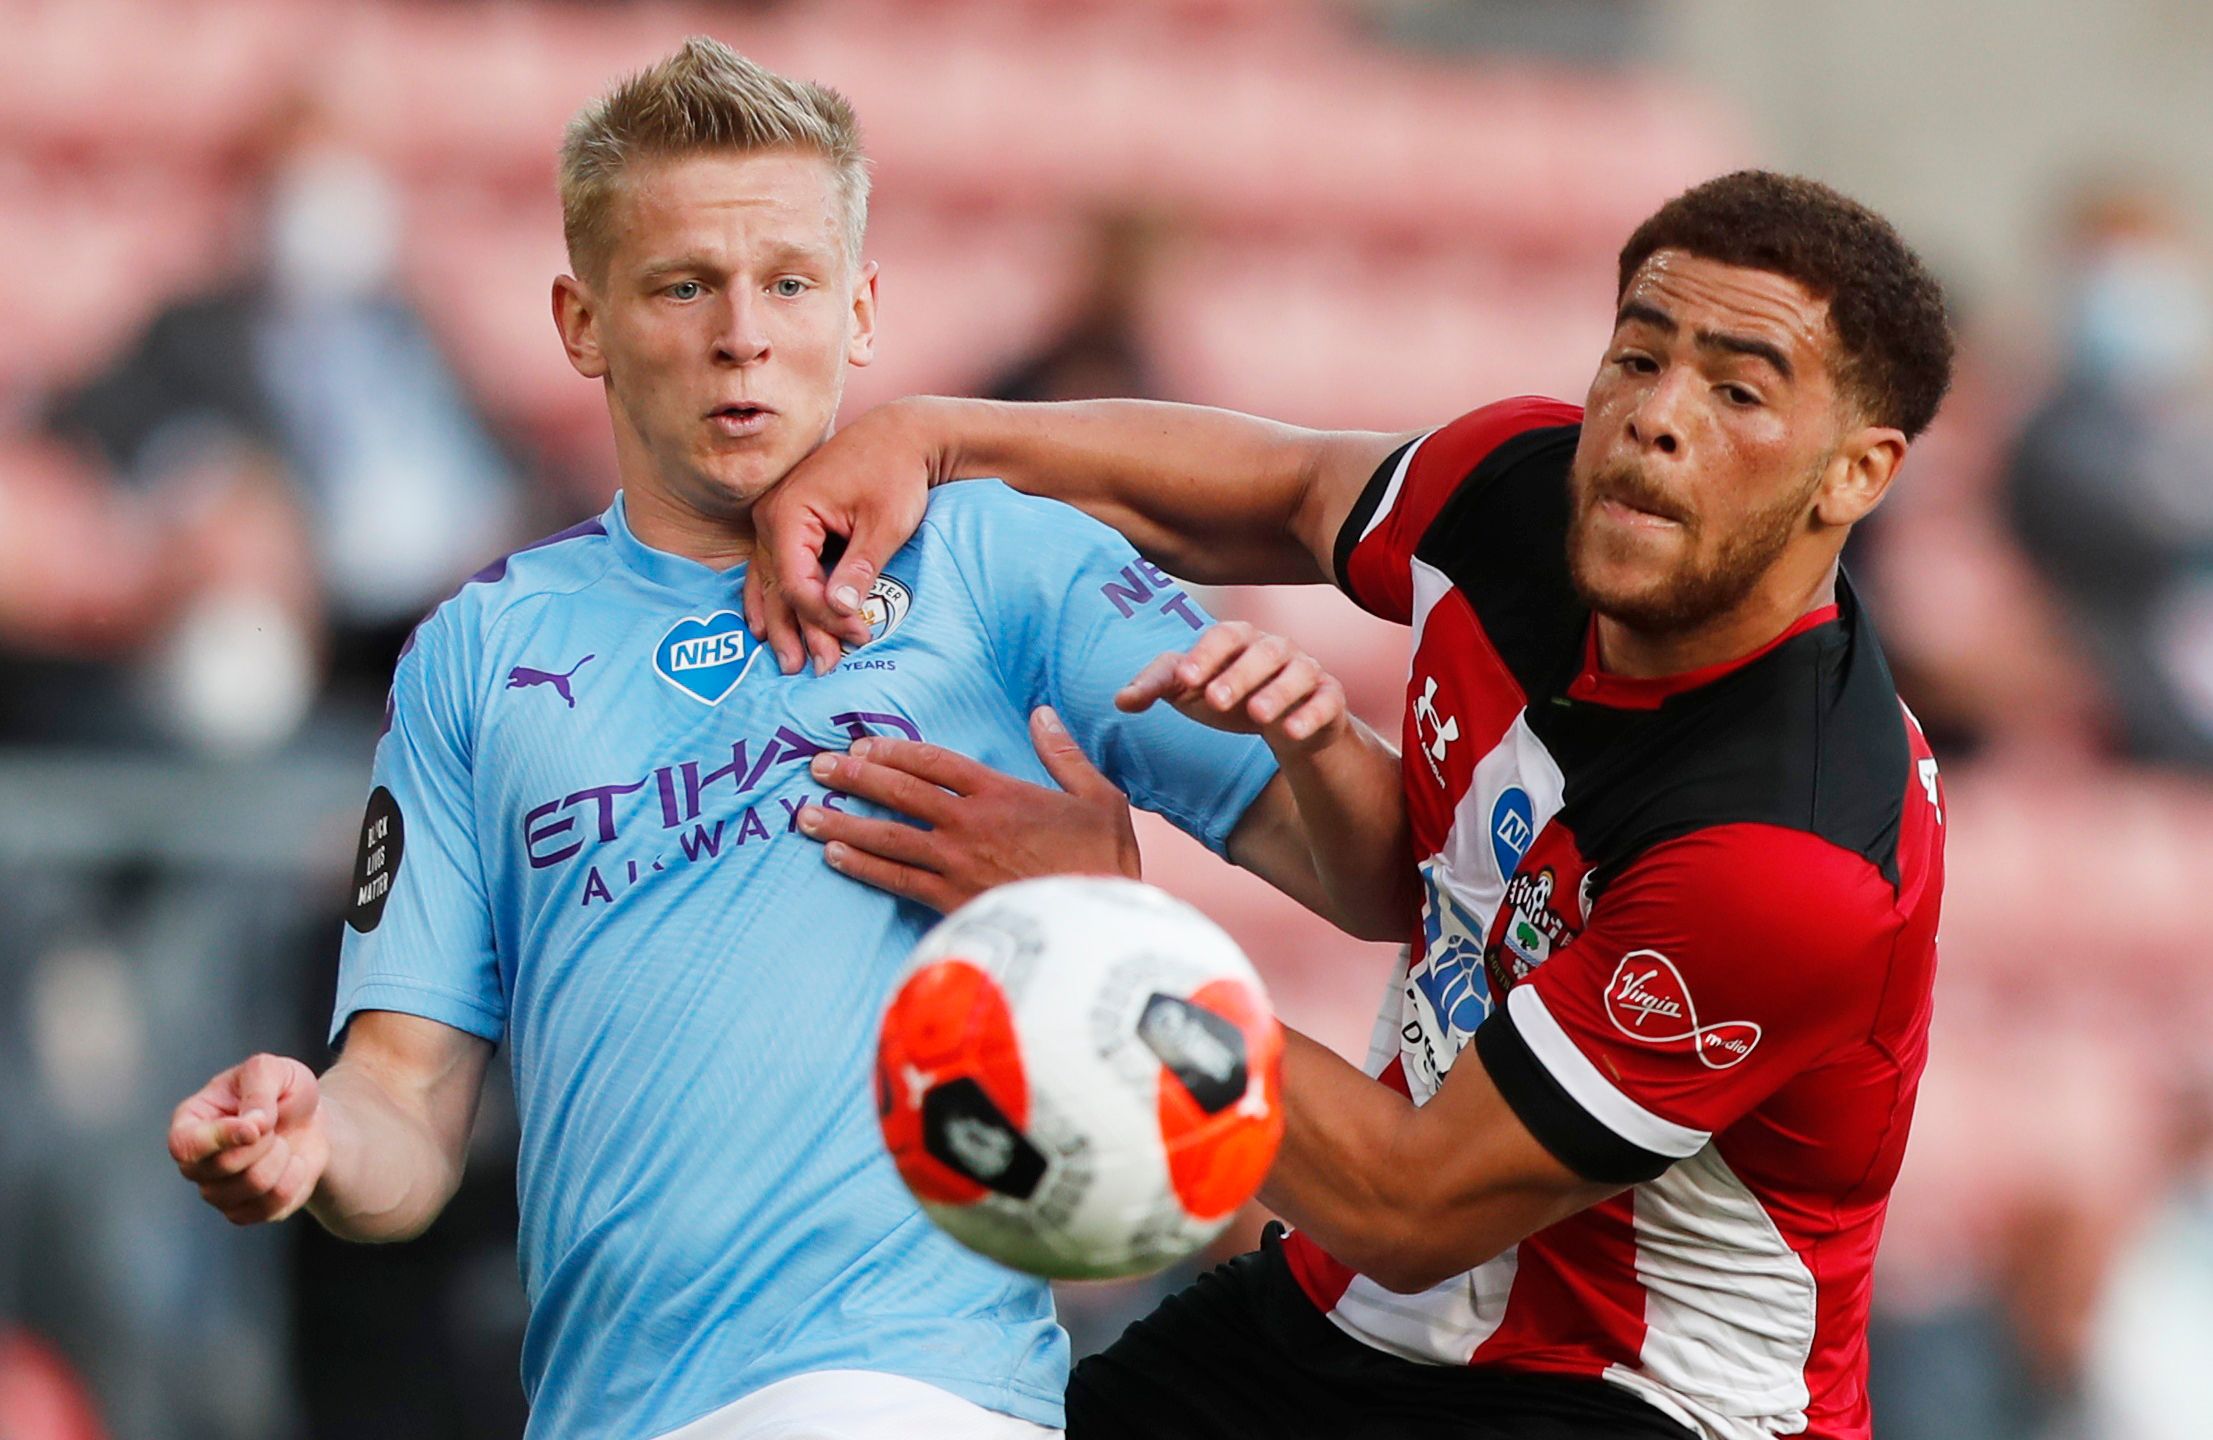 Soccer Football - Premier League - Southampton v Manchester City - St Mary's Stadium, Southampton, Britain - July 5, 2020  Manchester City's Oleksandr Zinchenko in action with Southampton's Che Adams, as play resumes behind closed doors following the outbreak of the coronavirus disease (COVID-19) Frank Augstein / Pool via REUTERS  EDITORIAL USE ONLY. No use with unauthorized audio, video, data, fixture lists, club/league logos or 